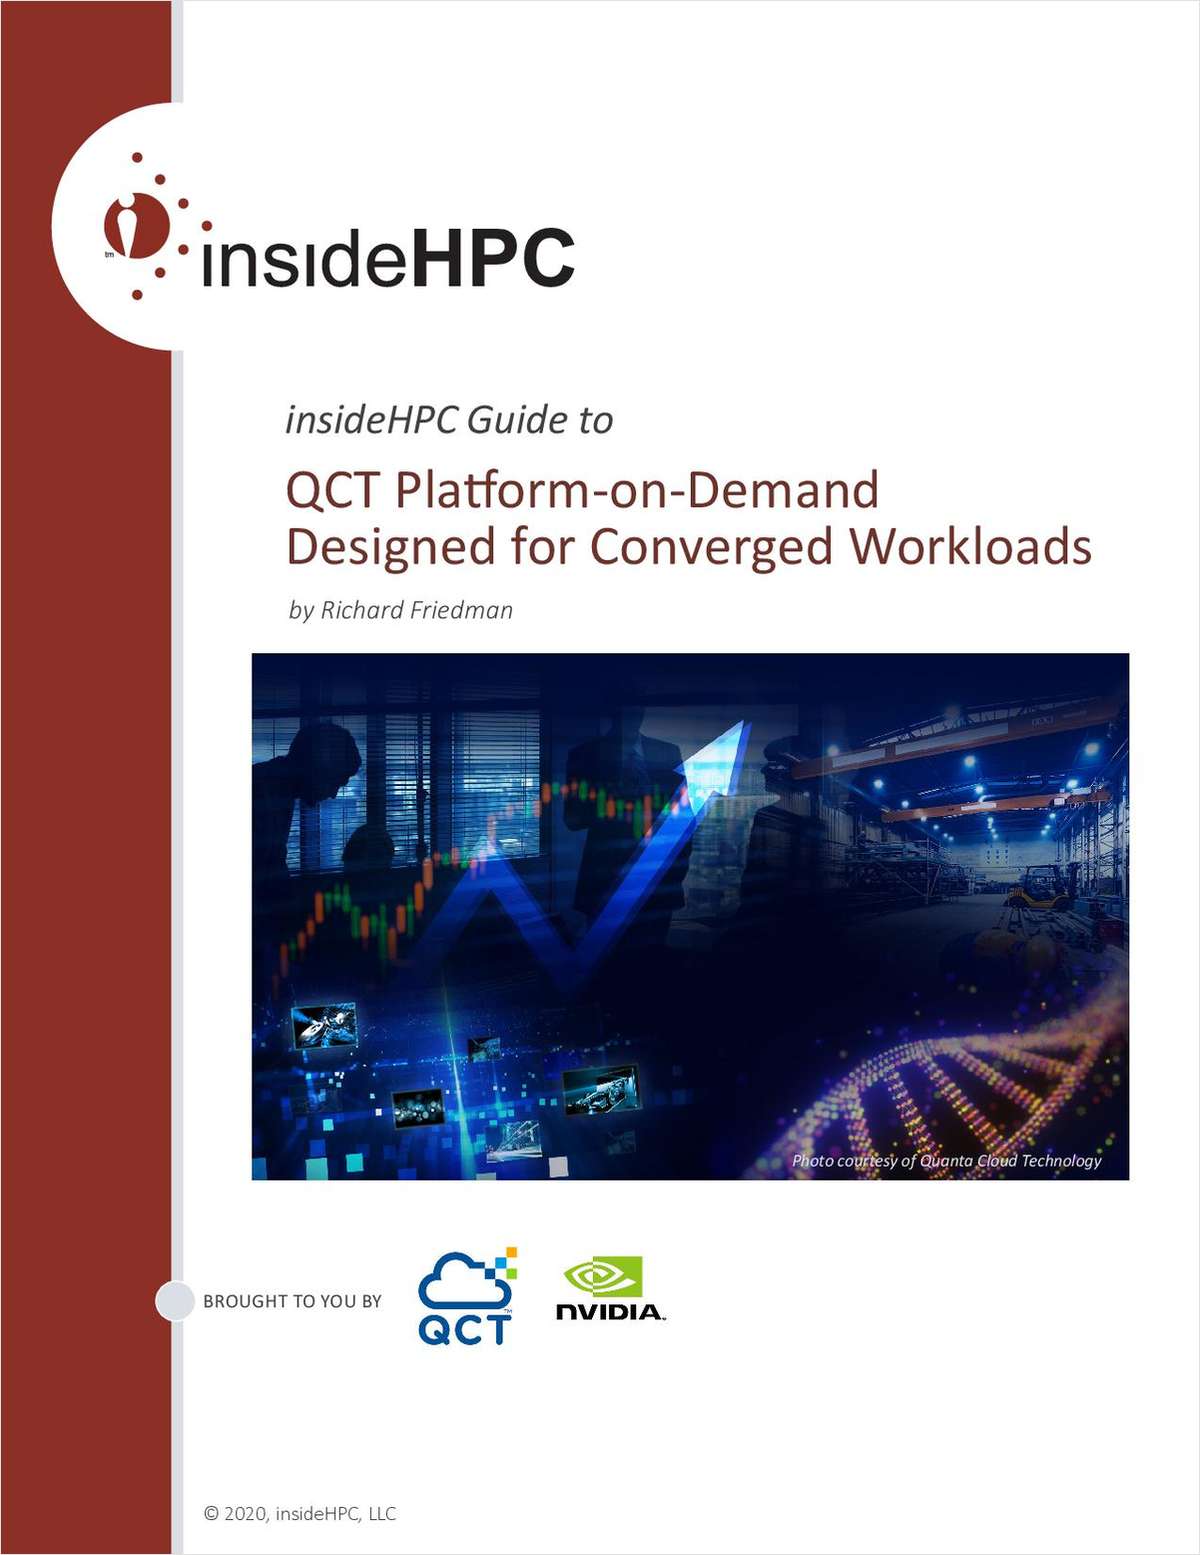 insideHPC Guide to QCT Platform-on-Demand Designed for Converged Workloads